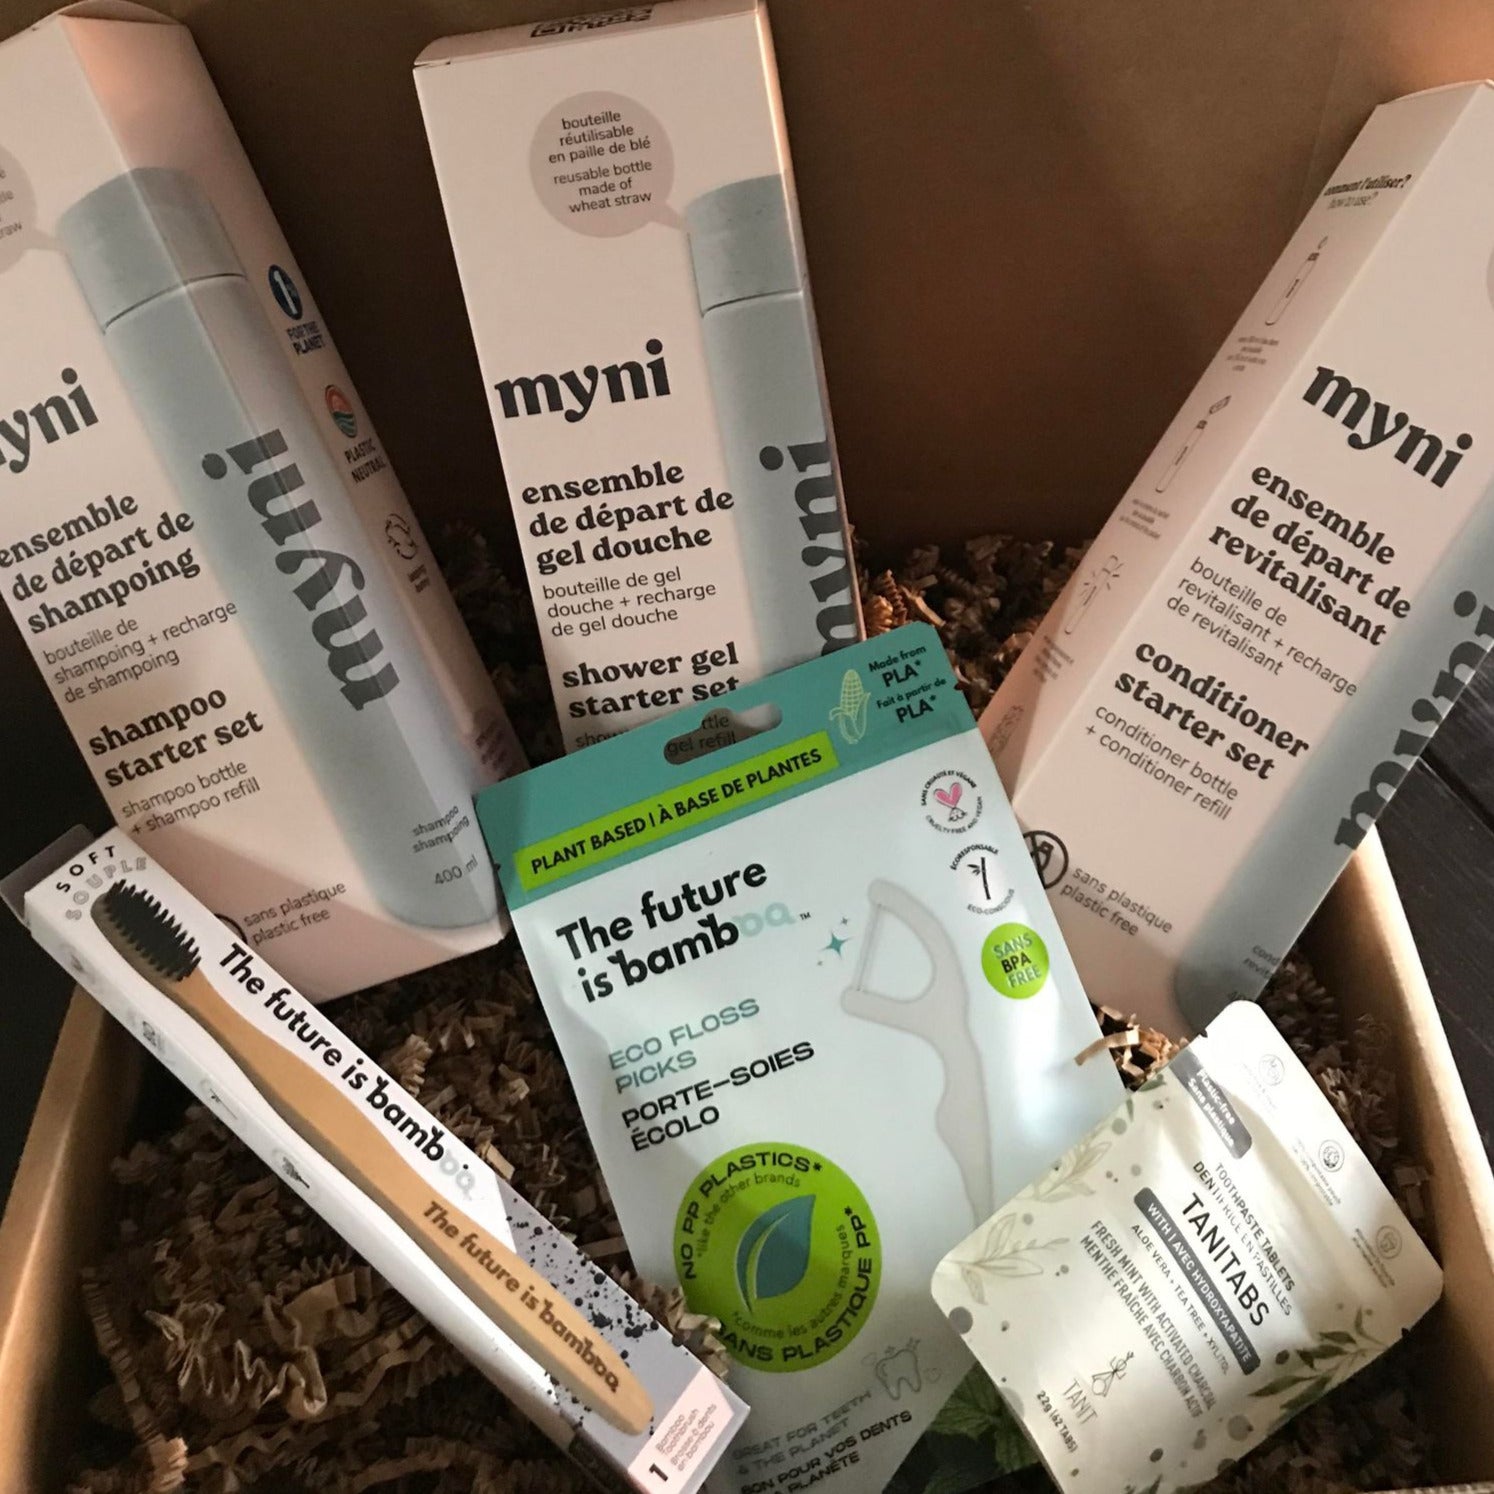 This personal care gift set includes a three myni starter kits - a shower gel, shampoo and conditioner (refillable biodegradable wheat straw bottle and powder to liquid pouch in each) as well as a one month supply of fresh mint with activated charcoal toothpaste tablets. 50 compostable floss picks, and a bamboo toothbrush with charcoal bristles